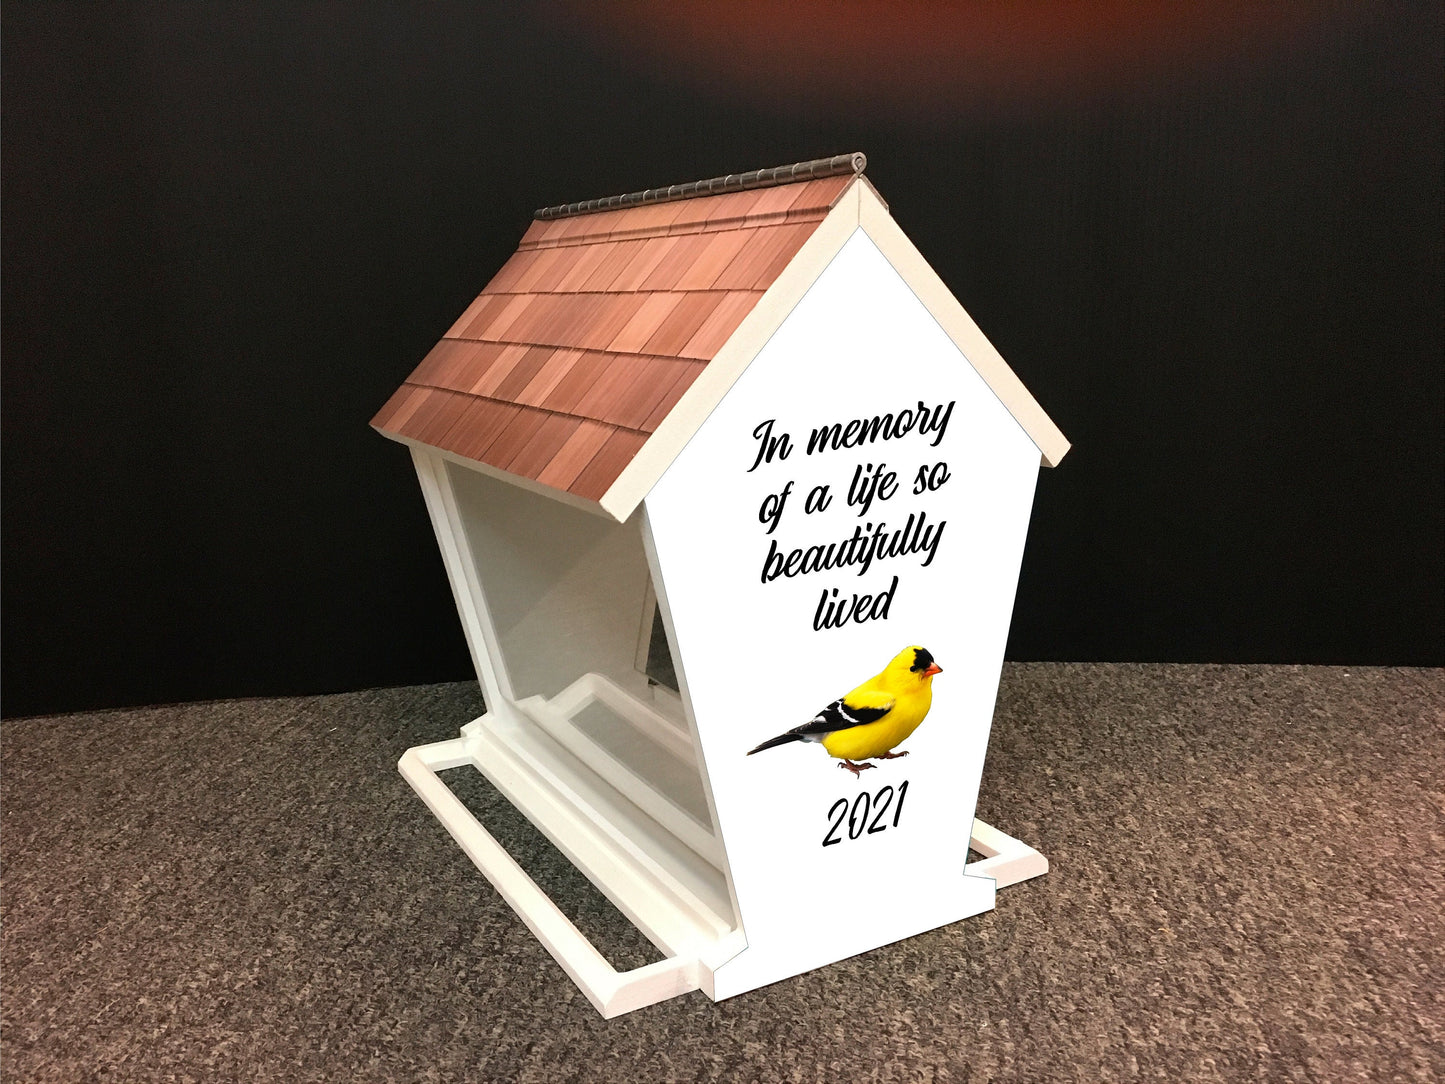 Favorite Bird Memorial Feeder w/Favorite Bird, Flower & Saying | Solid Building Grade PVC | Includes Multiple Mounting Options | Lasts Years